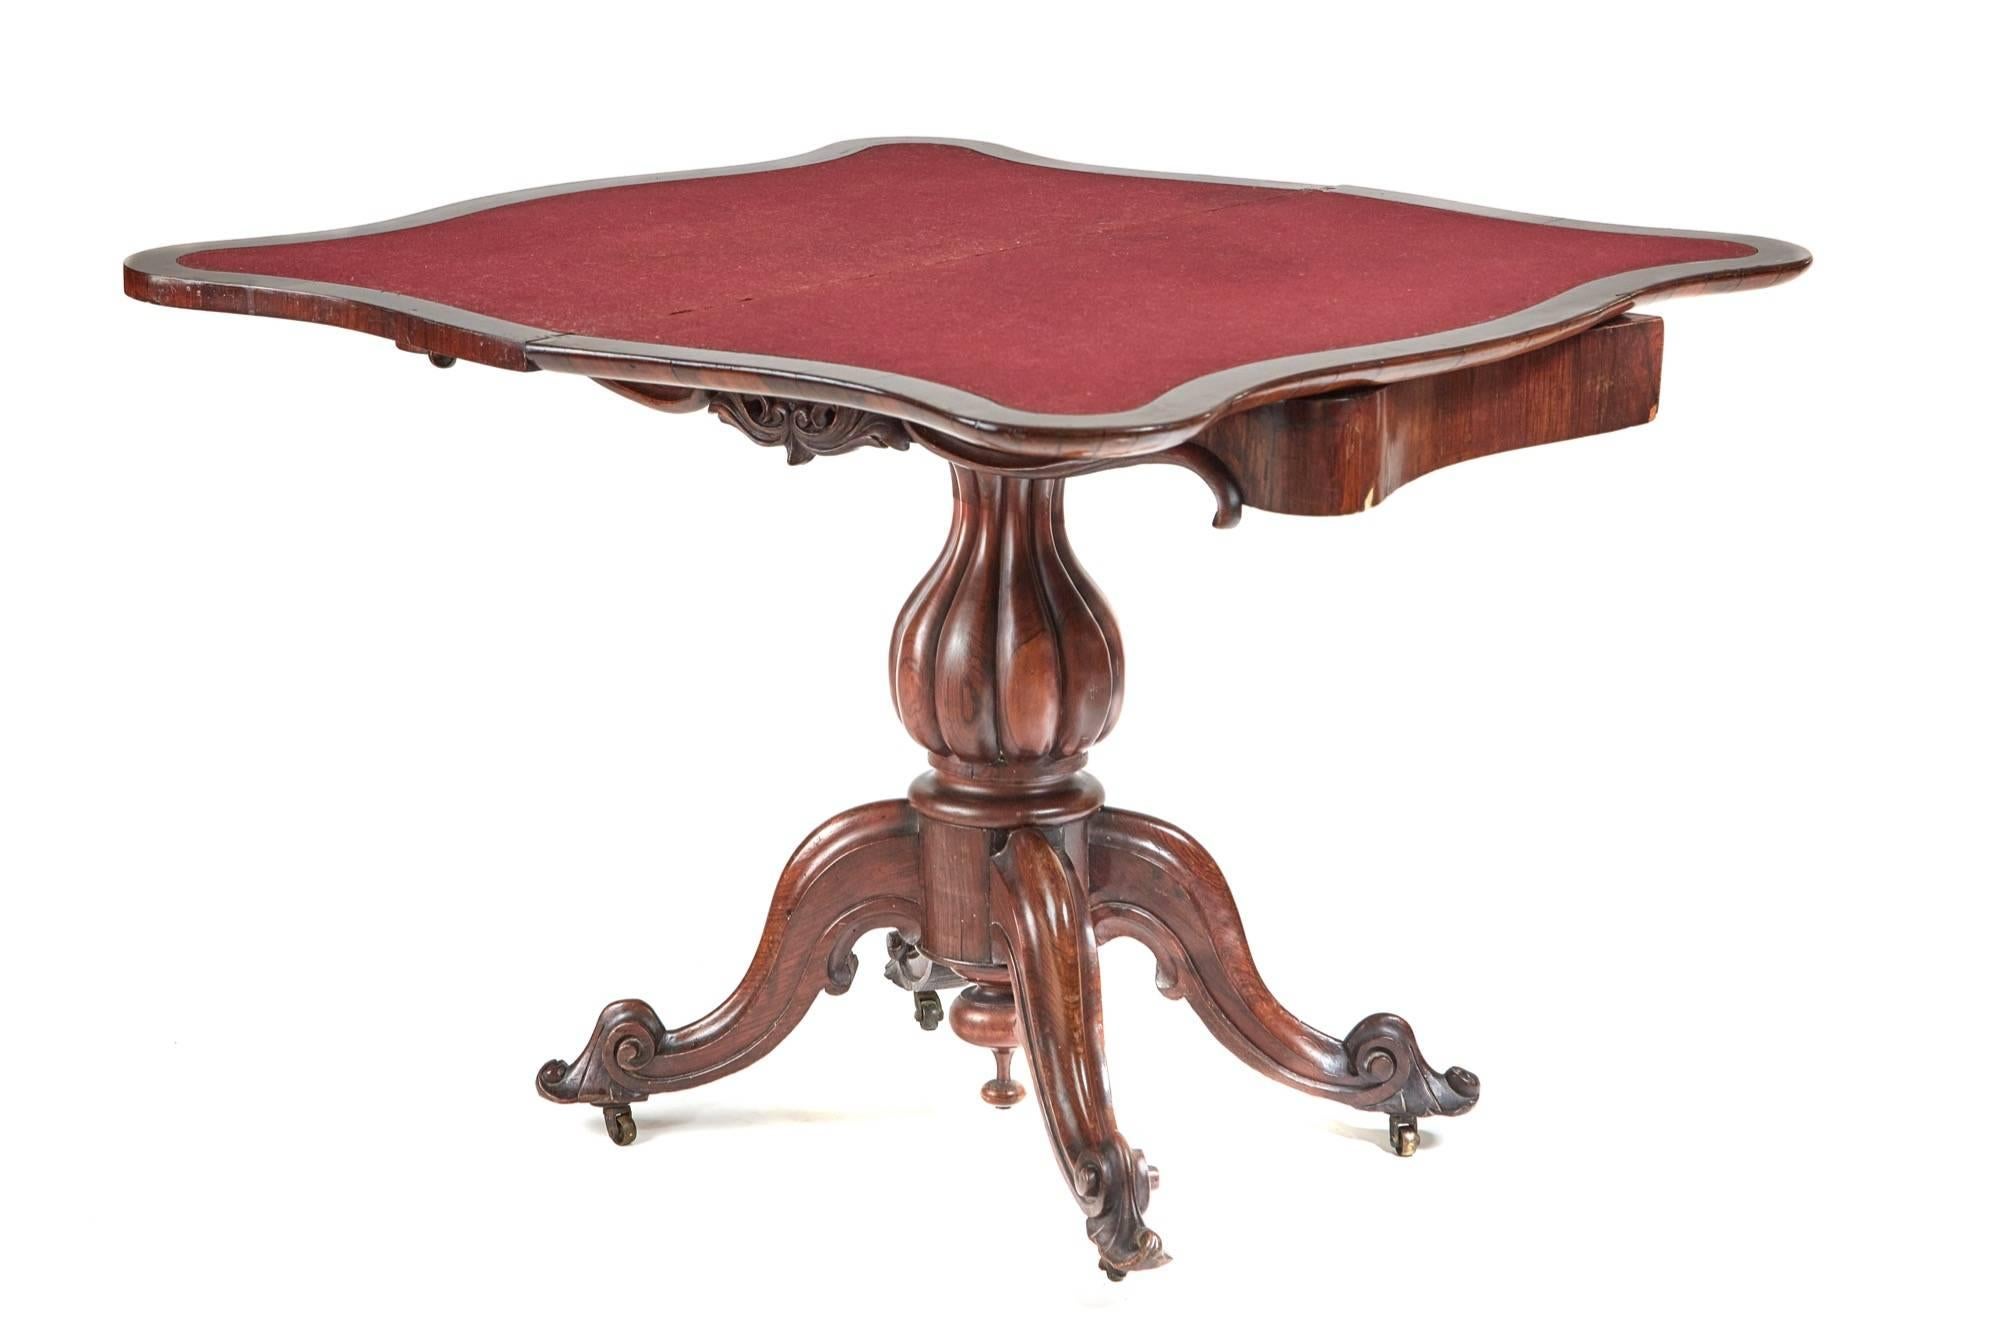 A good quality Victorian rosewood serpentine shaped fold over card table with swivel top, carving around the frieze, central reeded baluster shaped column standing on four sweeping carved cabriole legs with sea scroll on the ends, red baize